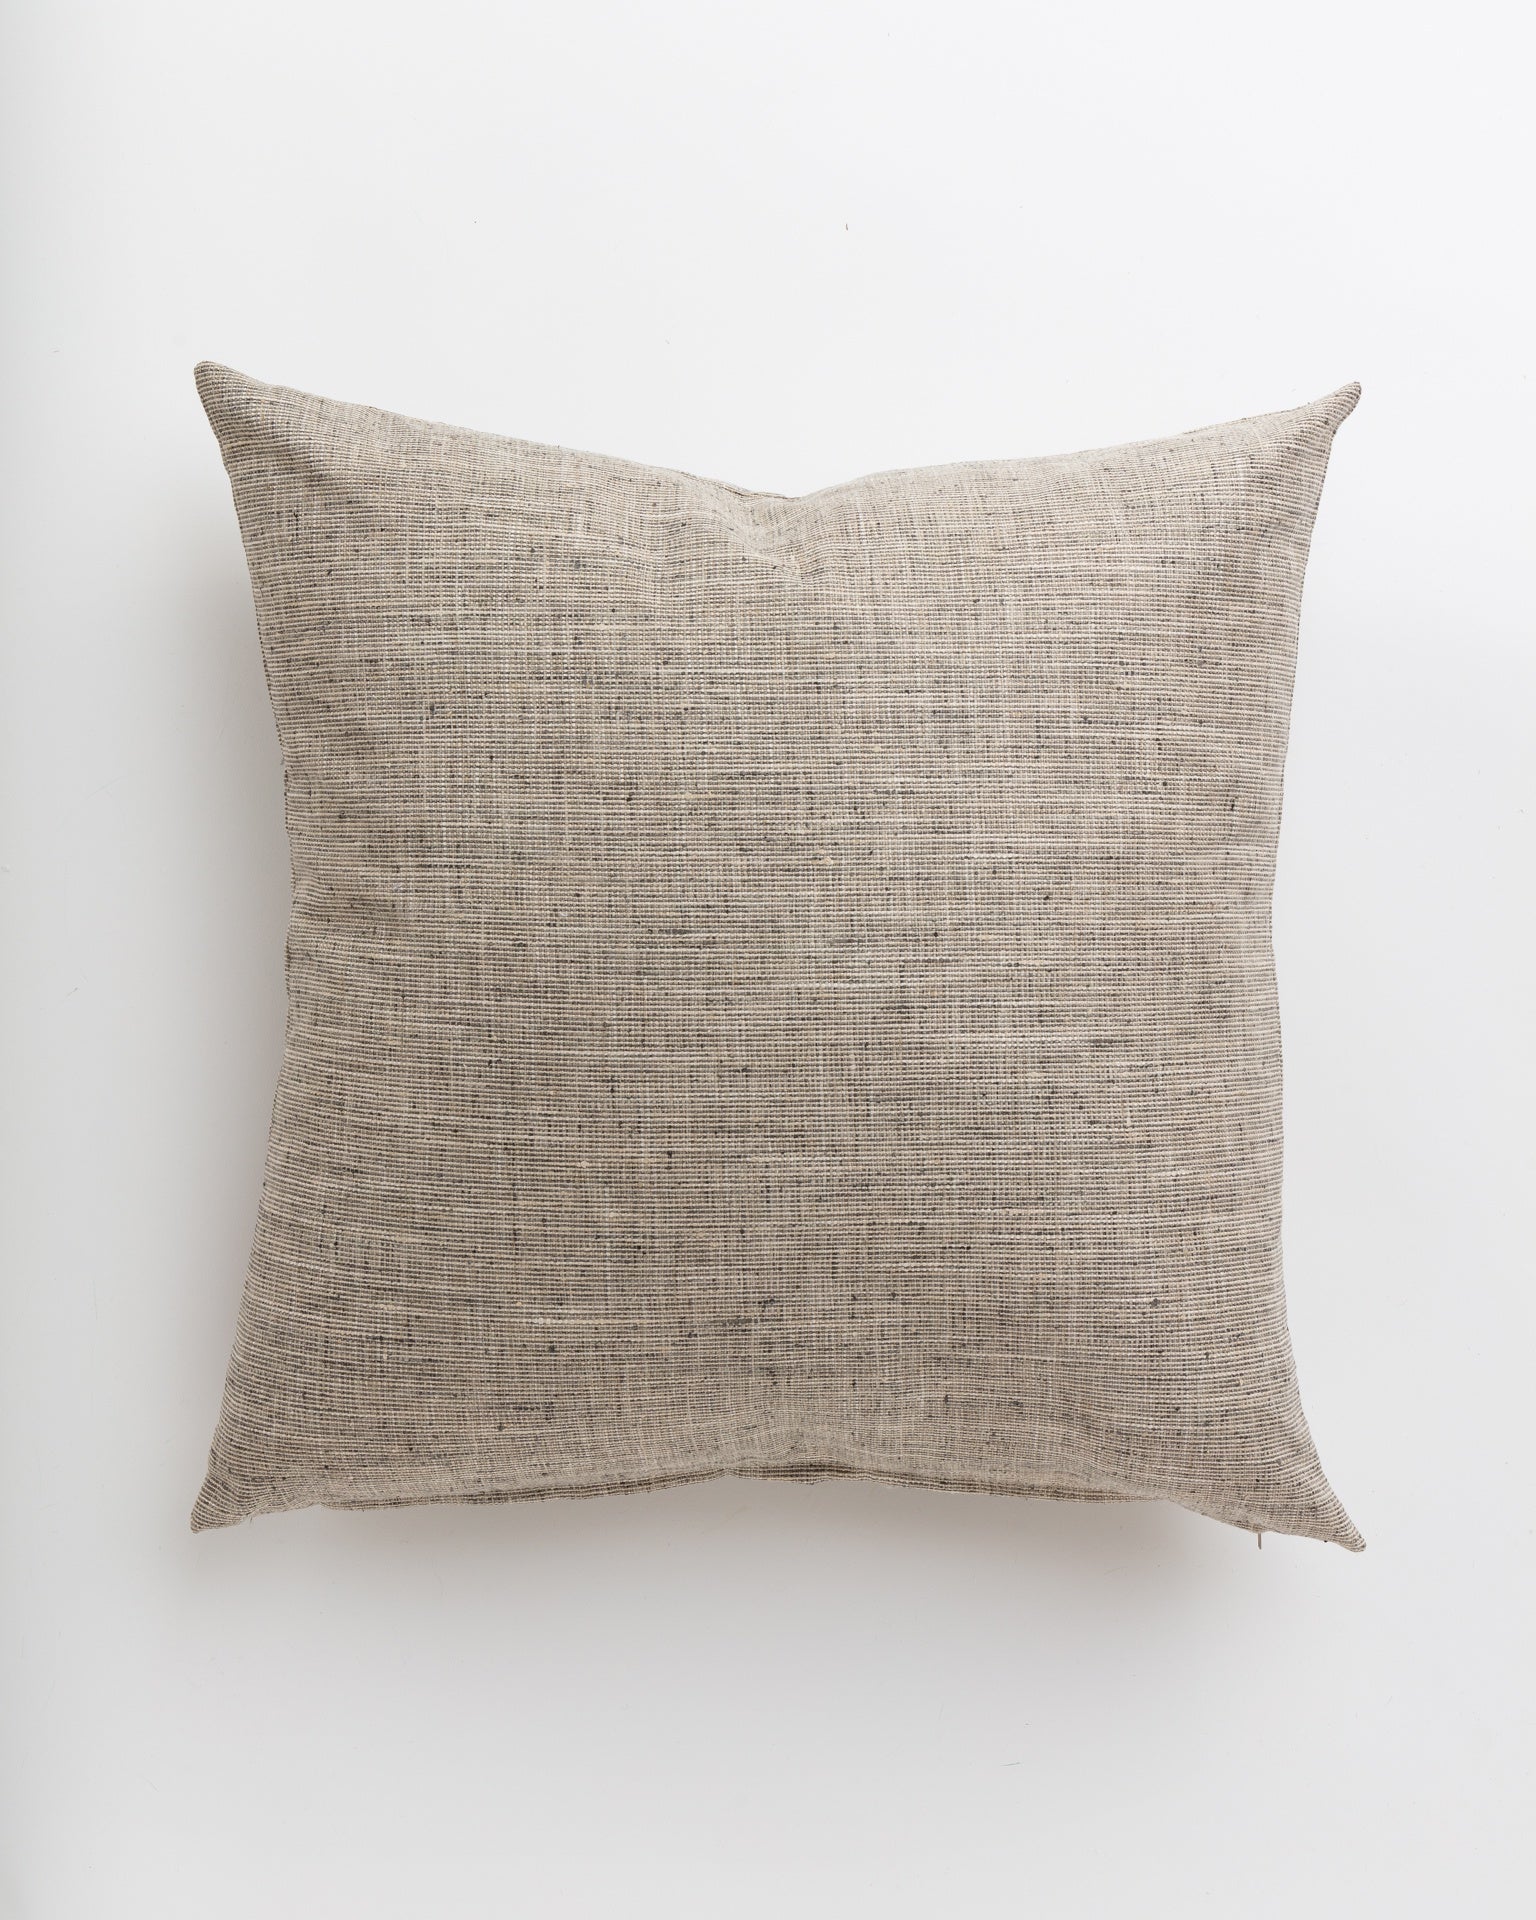 A simple Grasscloth Steel 24x24&quot; throw pillow by Gabby, designed for a Scottsdale bungalow, lying flat against a white background. The texture of the fabric is prominently visible, highlighting its natural, coarse weave.